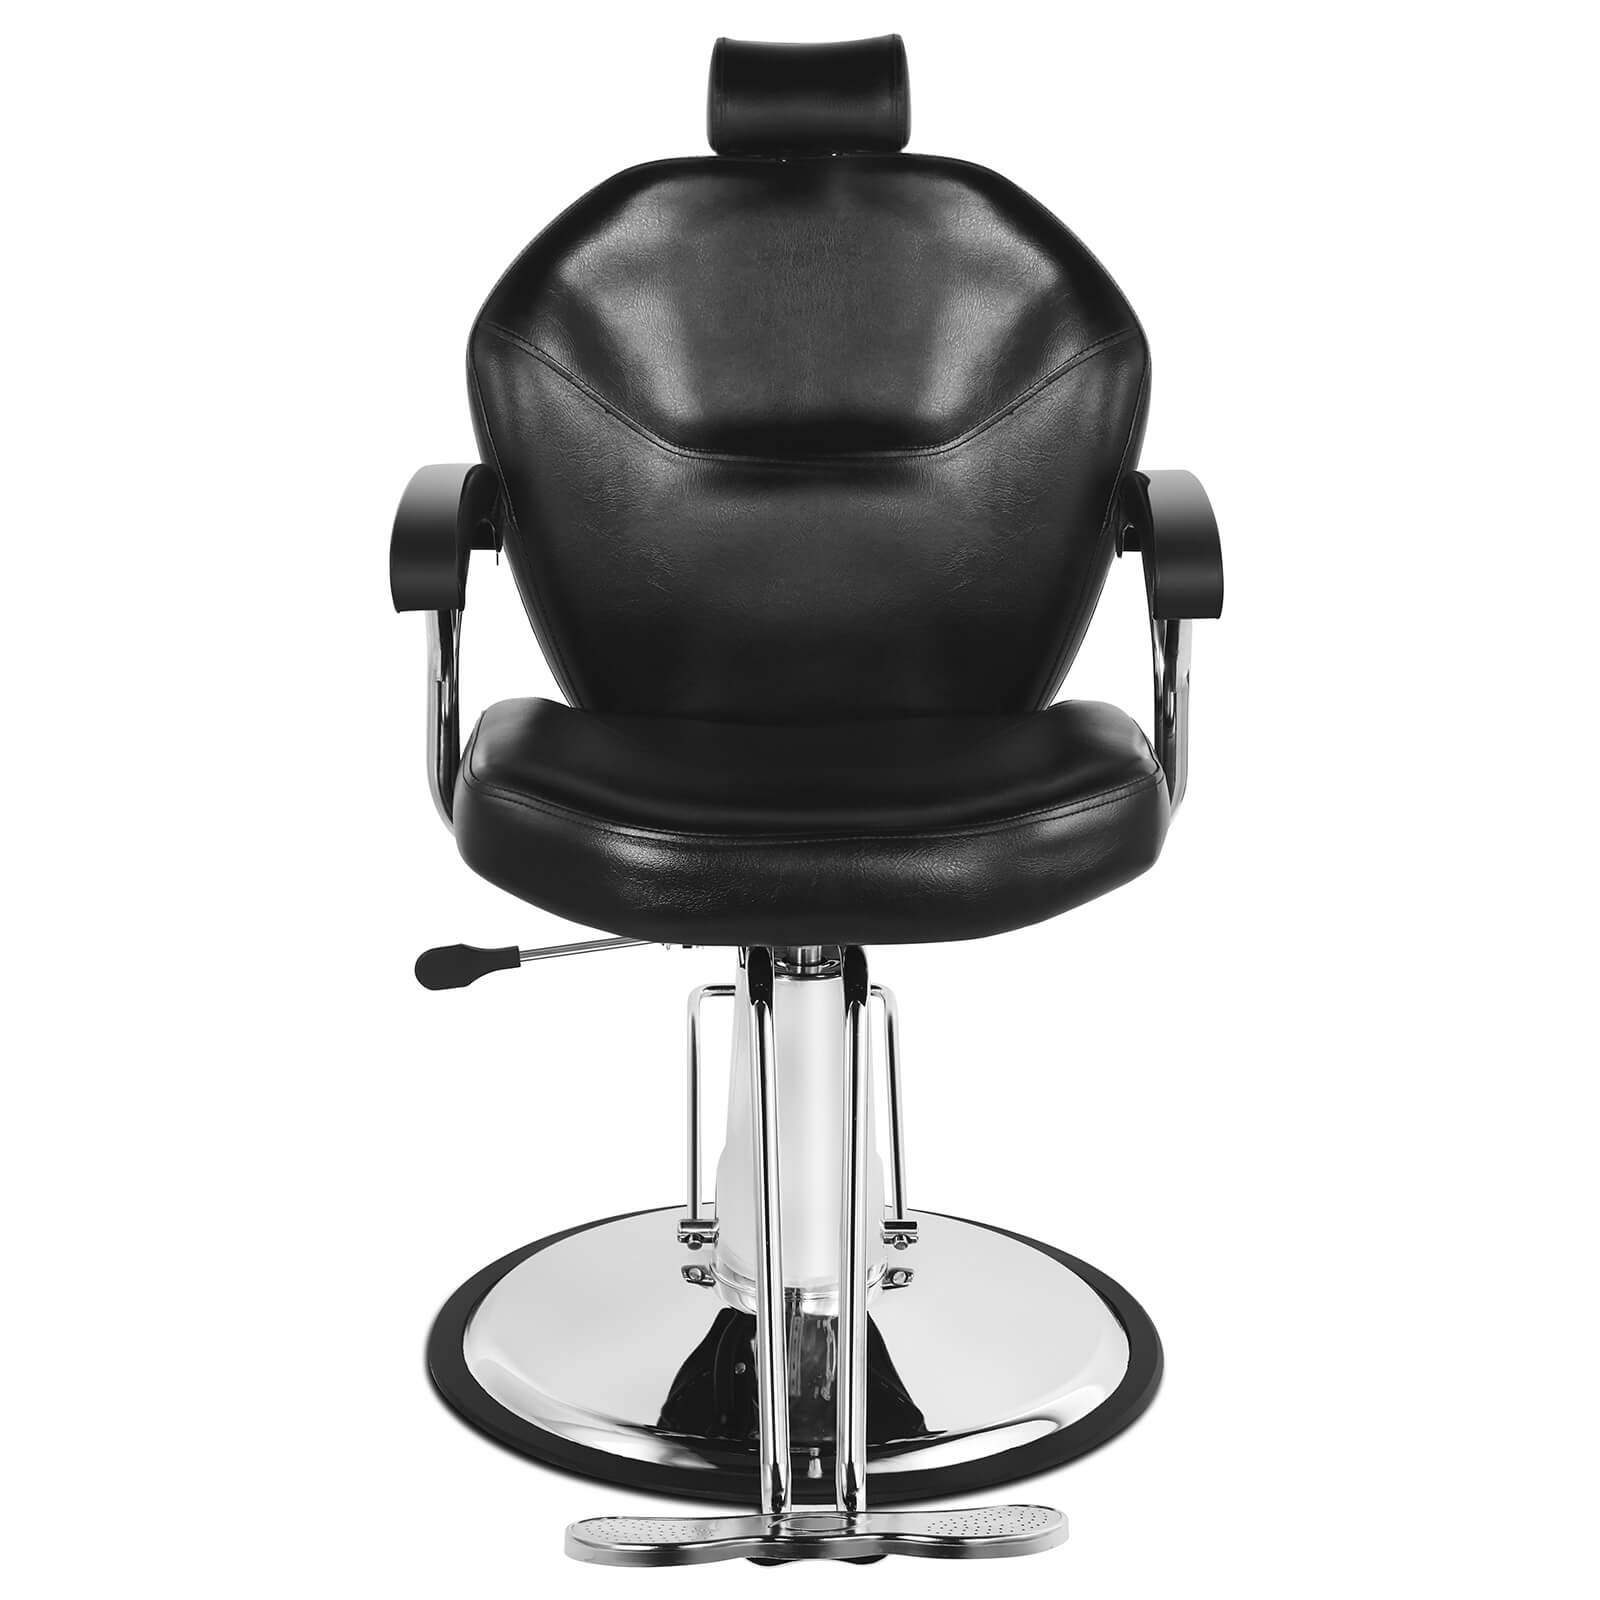 #5004 Hydraulic Reclining All Purpose Barber Chair